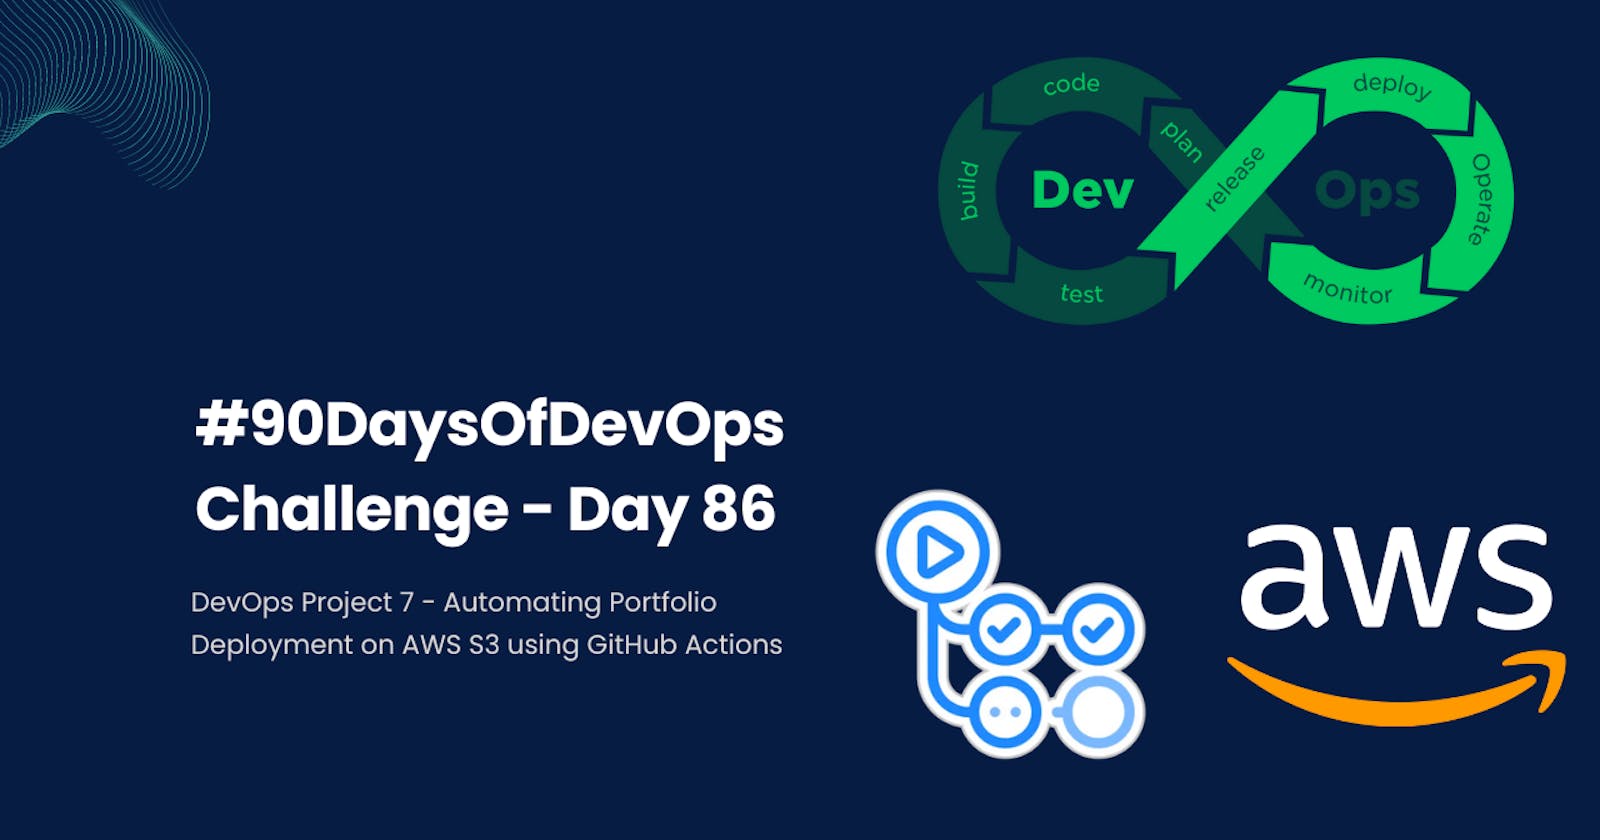 #90DaysOfDevOps Challenge - Day 86 - DevOps Project 7 - Automating Portfolio Deployment on AWS S3 using GitHub Actions